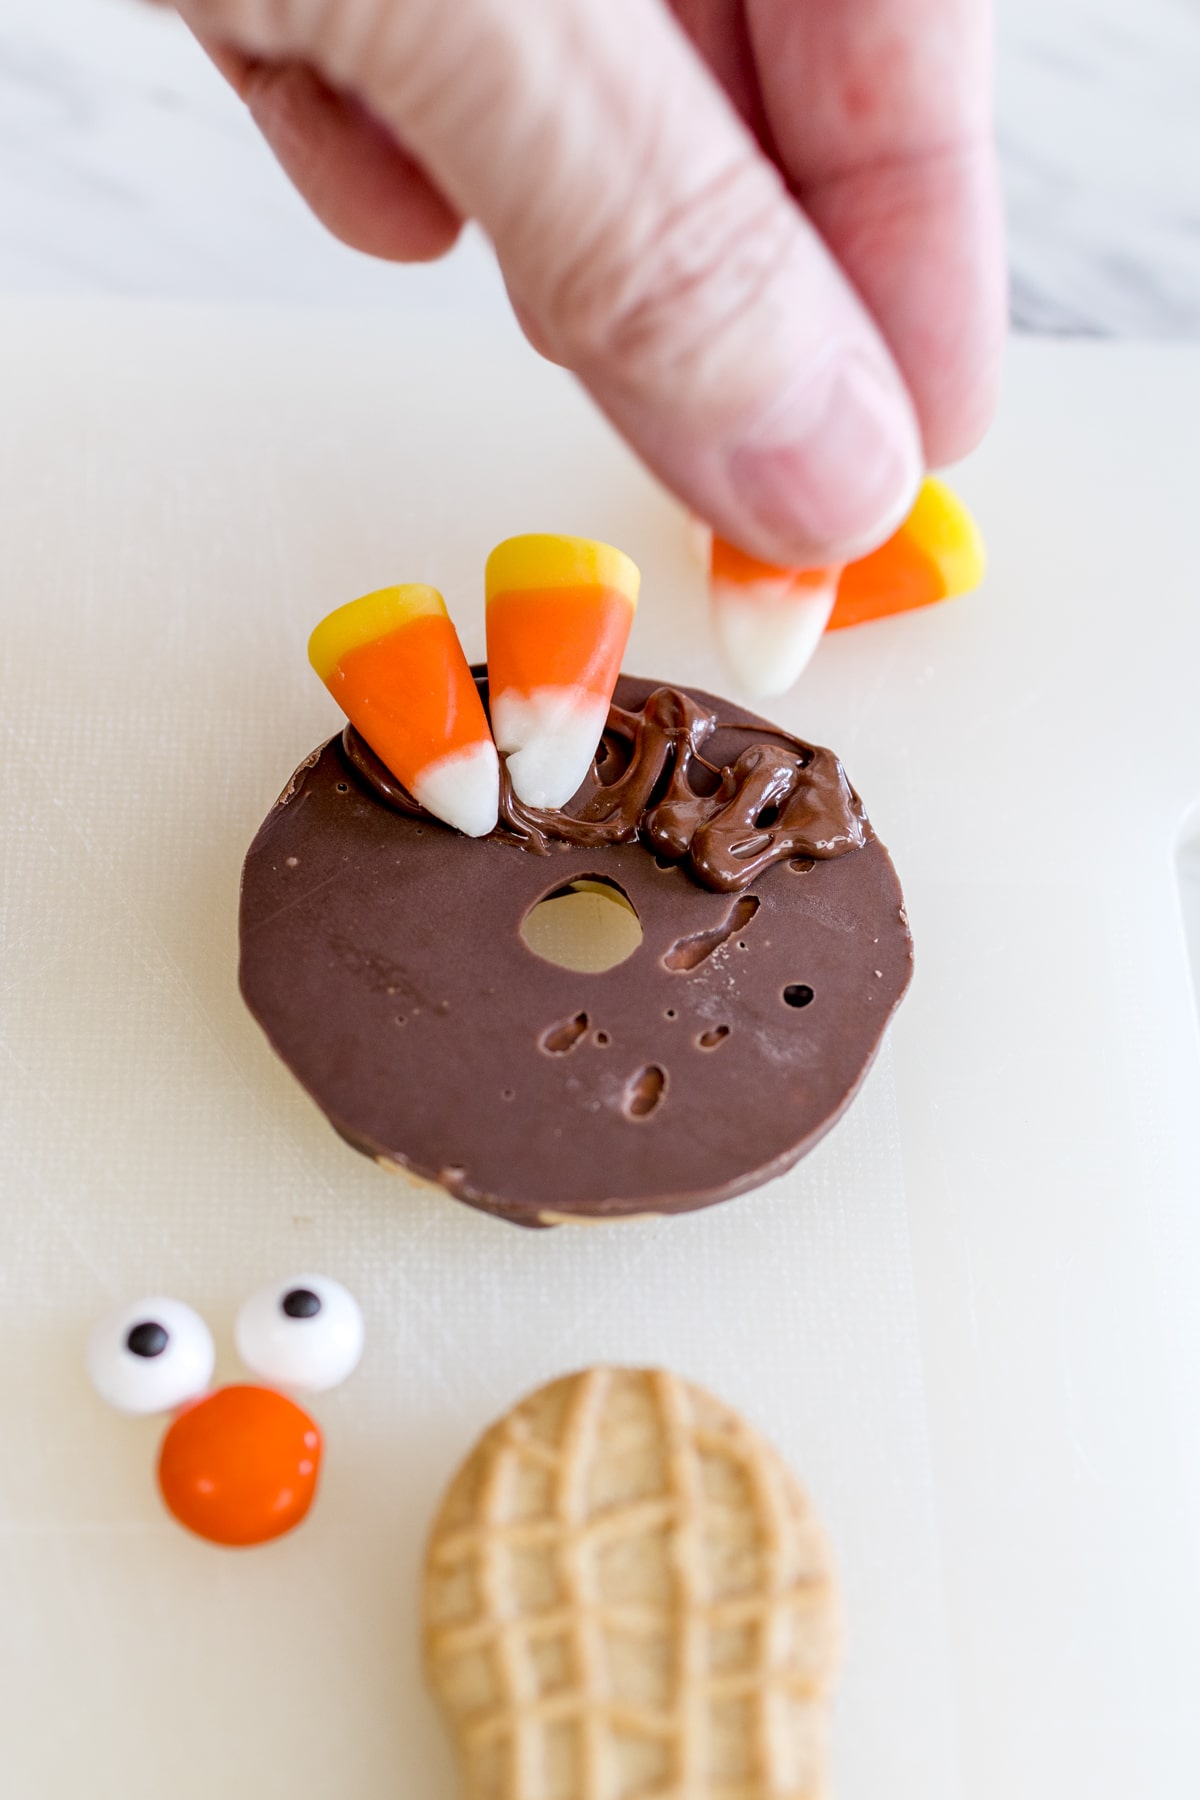 Place candy corn candies in melted chocolate for tail feathers